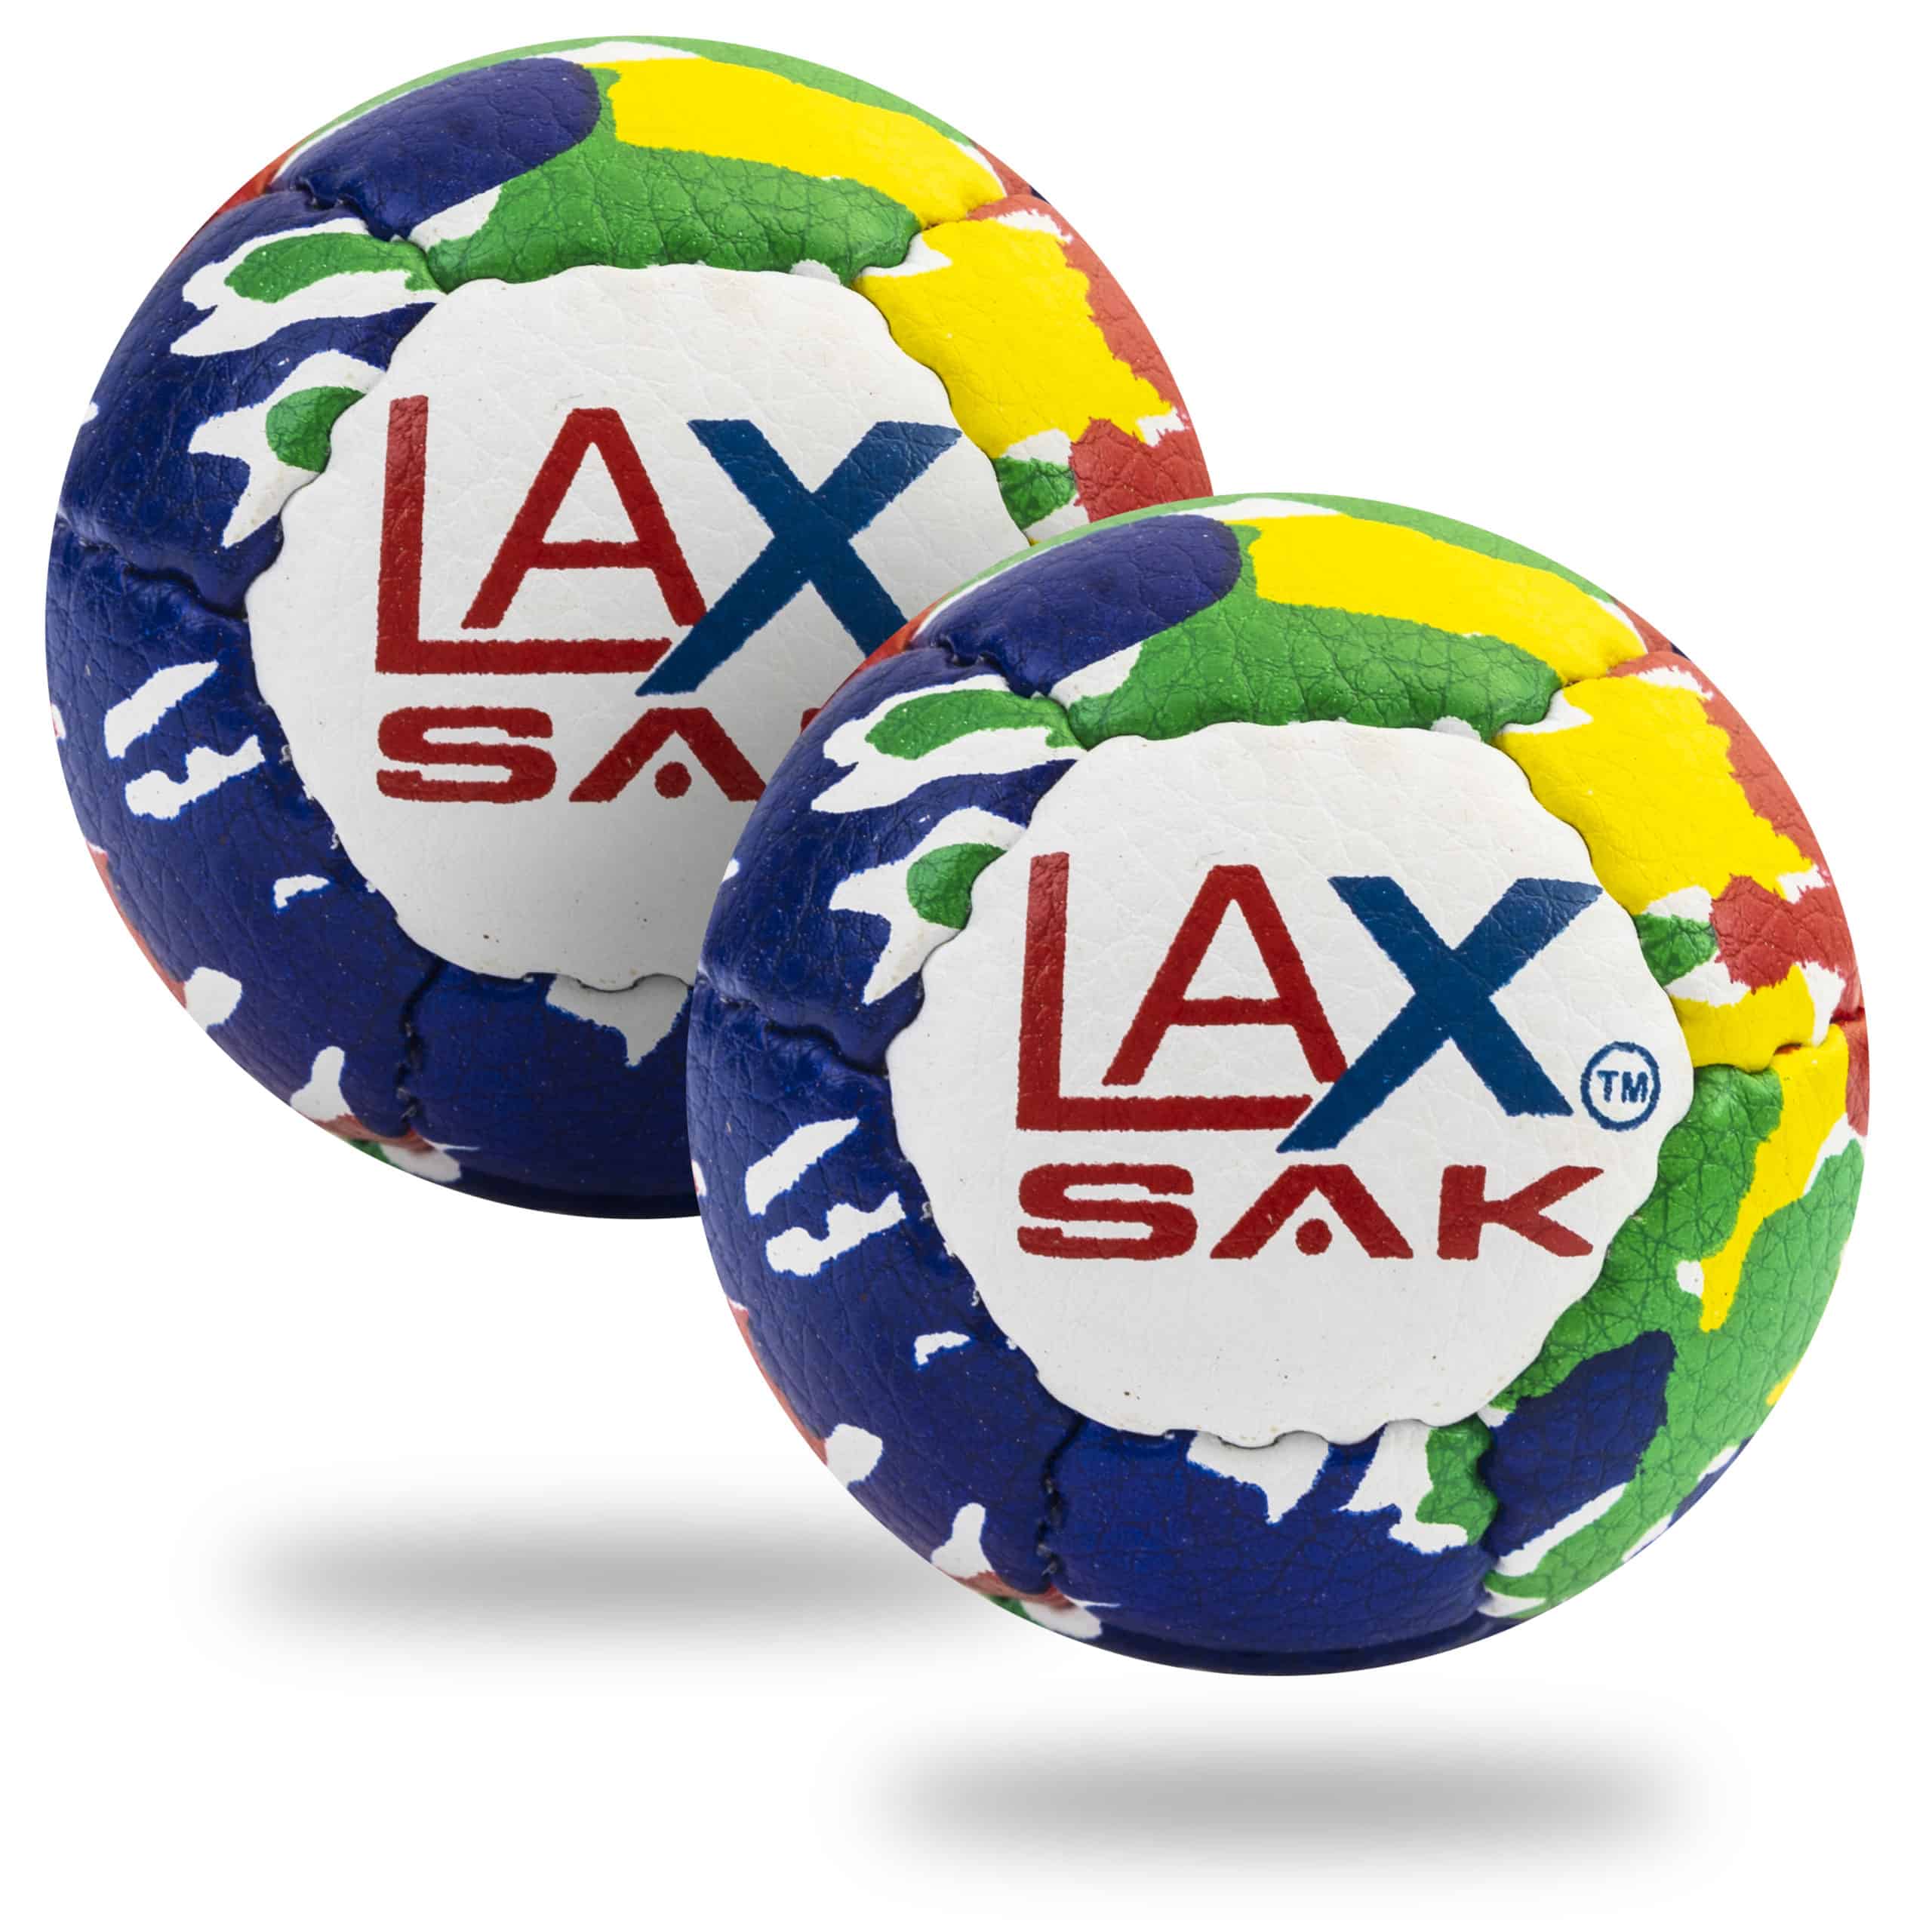 Less Bounce & Minimal Rebounds Great for Indoor & Outdoor Practices Psychedelic Same Weight & Size as a Regulation Lacrosse Balls 3 Pack Lacrosse Sak Soft Practice Lacrosse Balls 